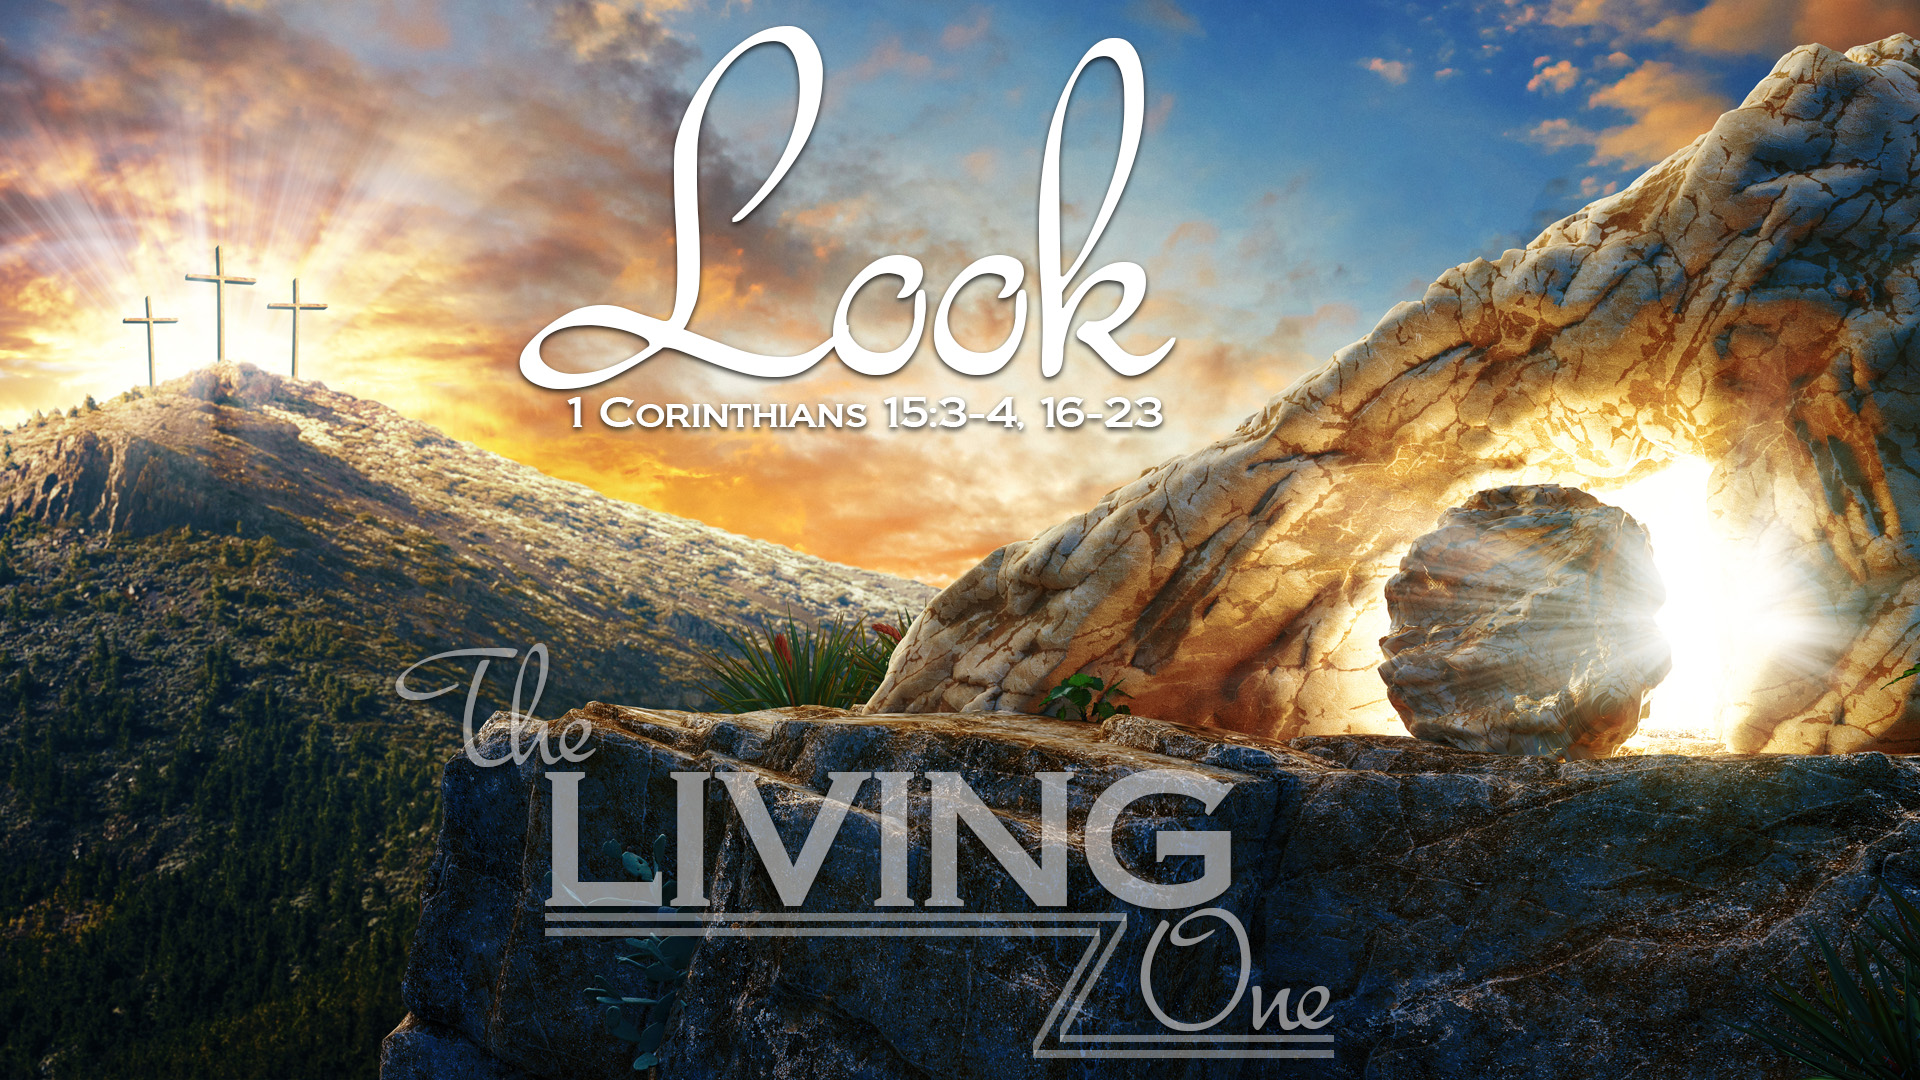 Living One, Part 2: Look Image